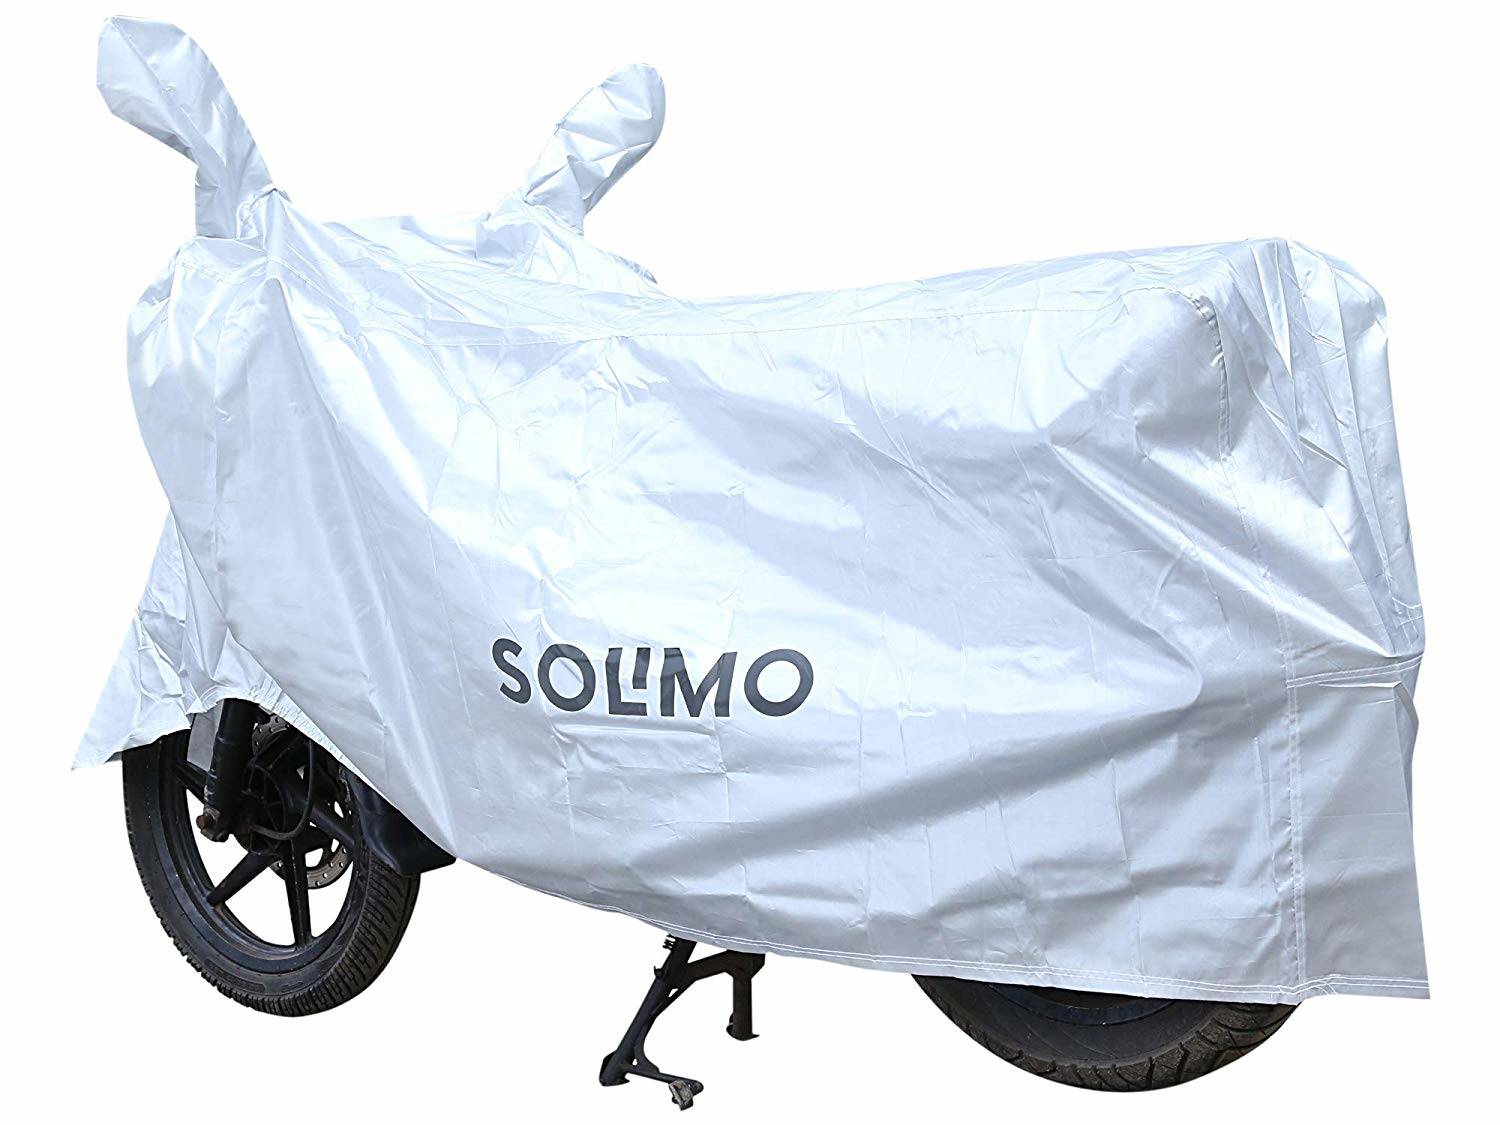 motorbike covers for sale